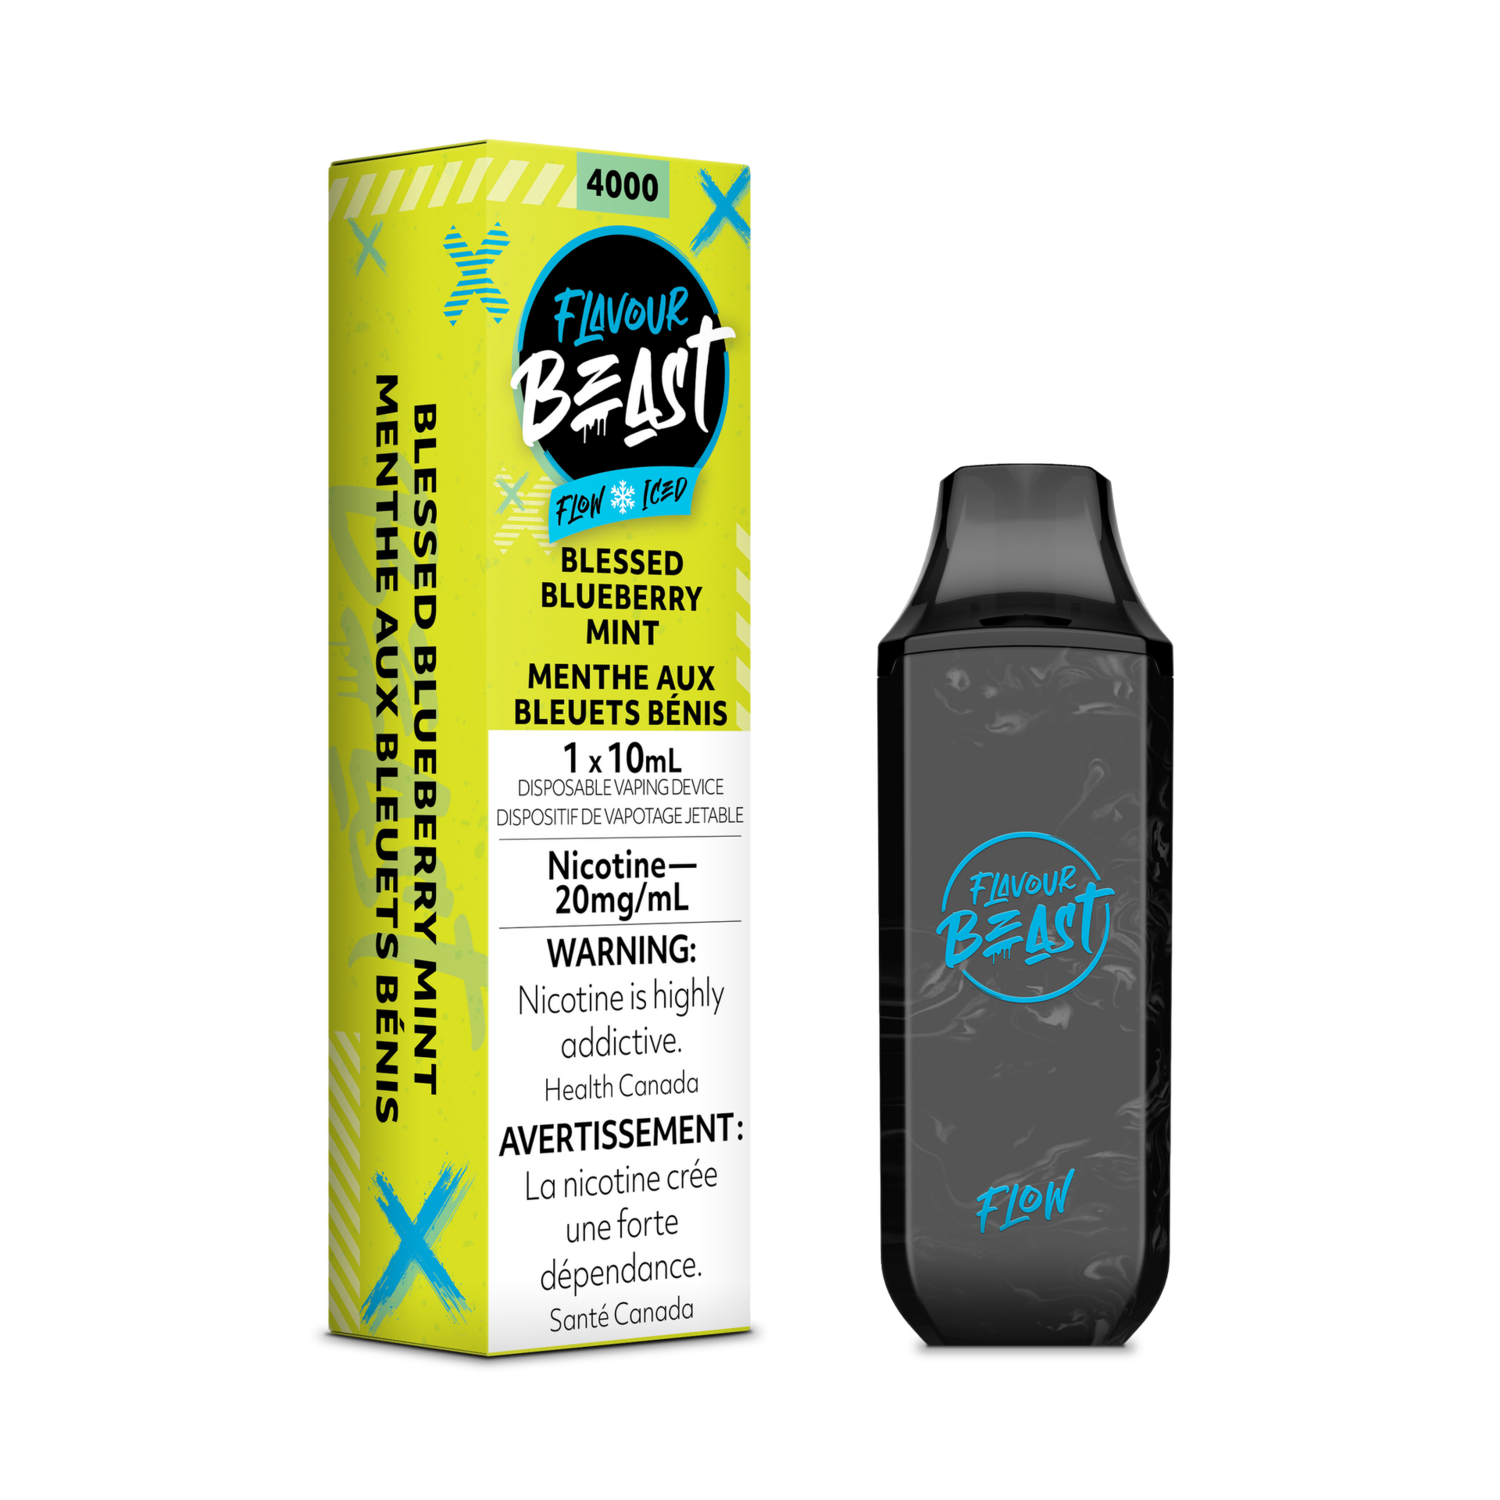 Blessed Blueberry Mint Iced - Flavour Beast Flow Disposable